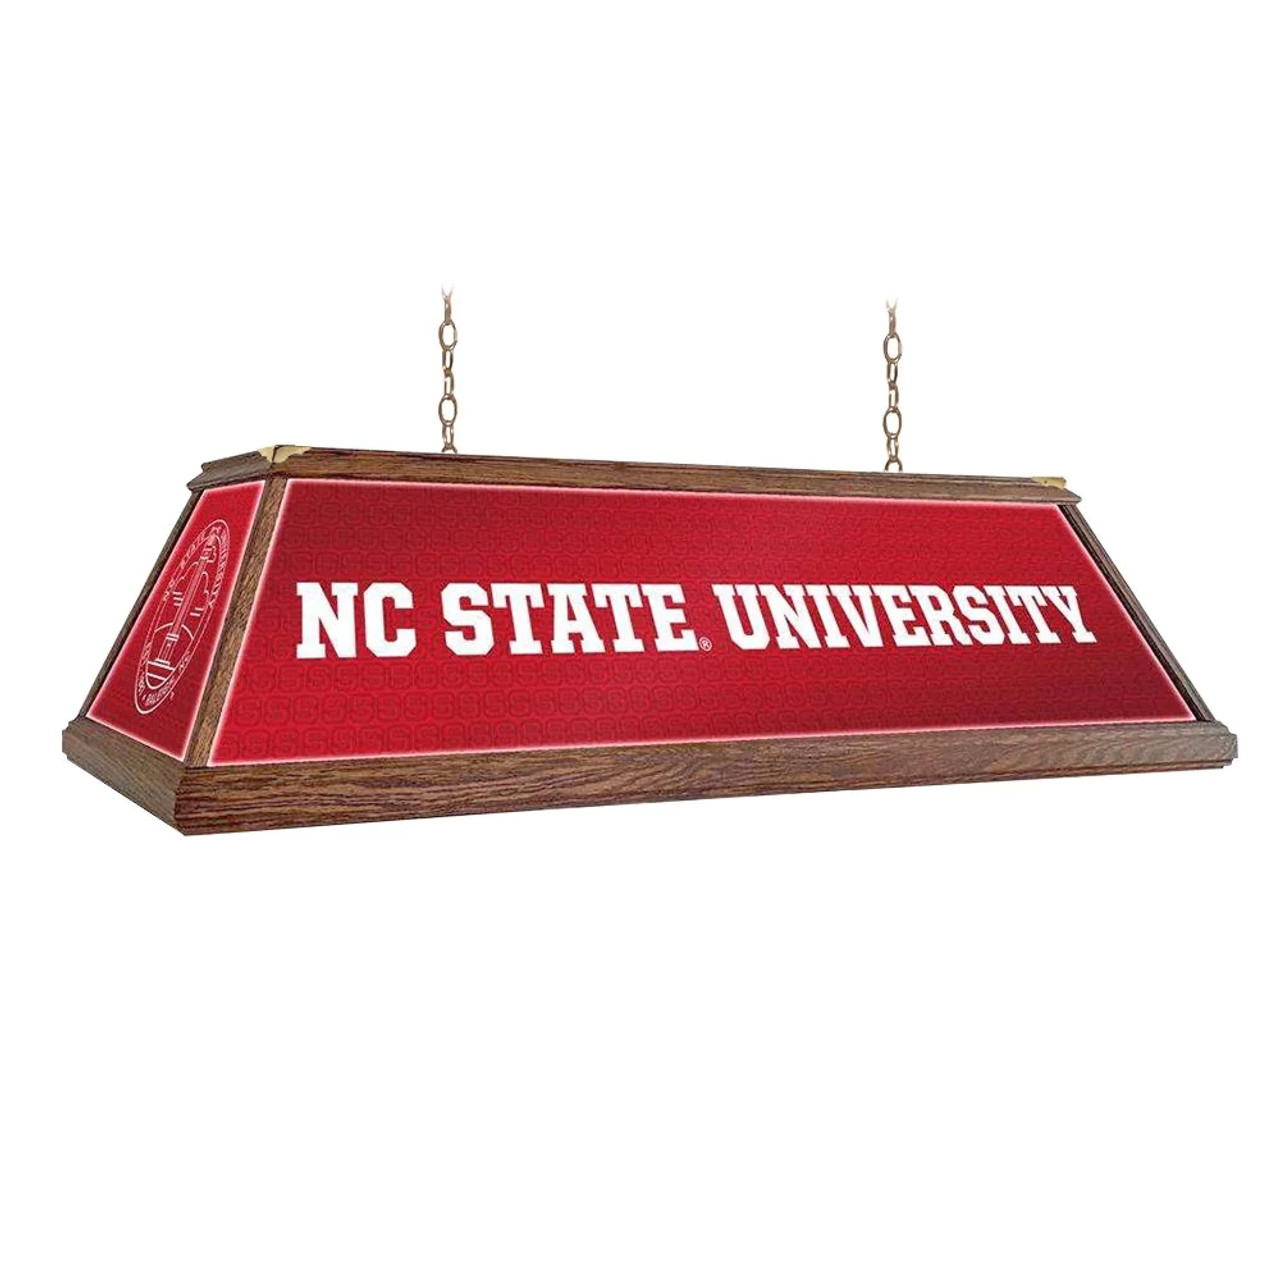 NC, North Carolina, Wolfpack, Pack, Premium, Wood, Billiard, Pool, Table, Light, Lamp, NCNCST-330-01, The Fan-Brand, 686082106412